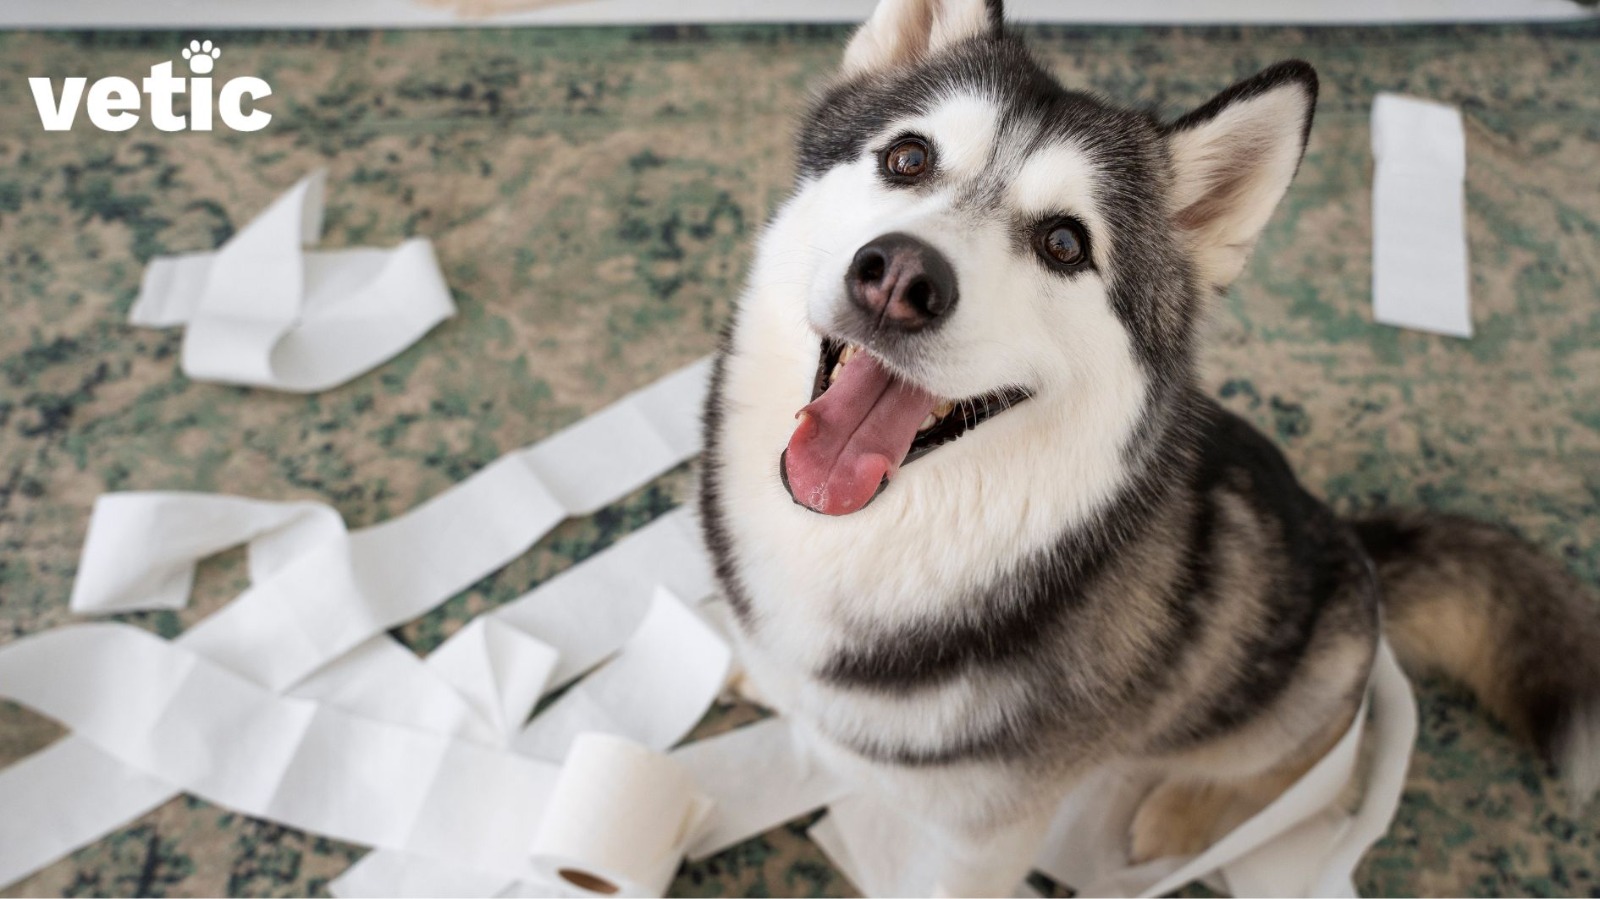 A husky sitting on a green carpeted floor looking up at the camera surrounded by a mess of TP. Leaving a dog breed such as a Husky alone can lead to devastating circumstances.